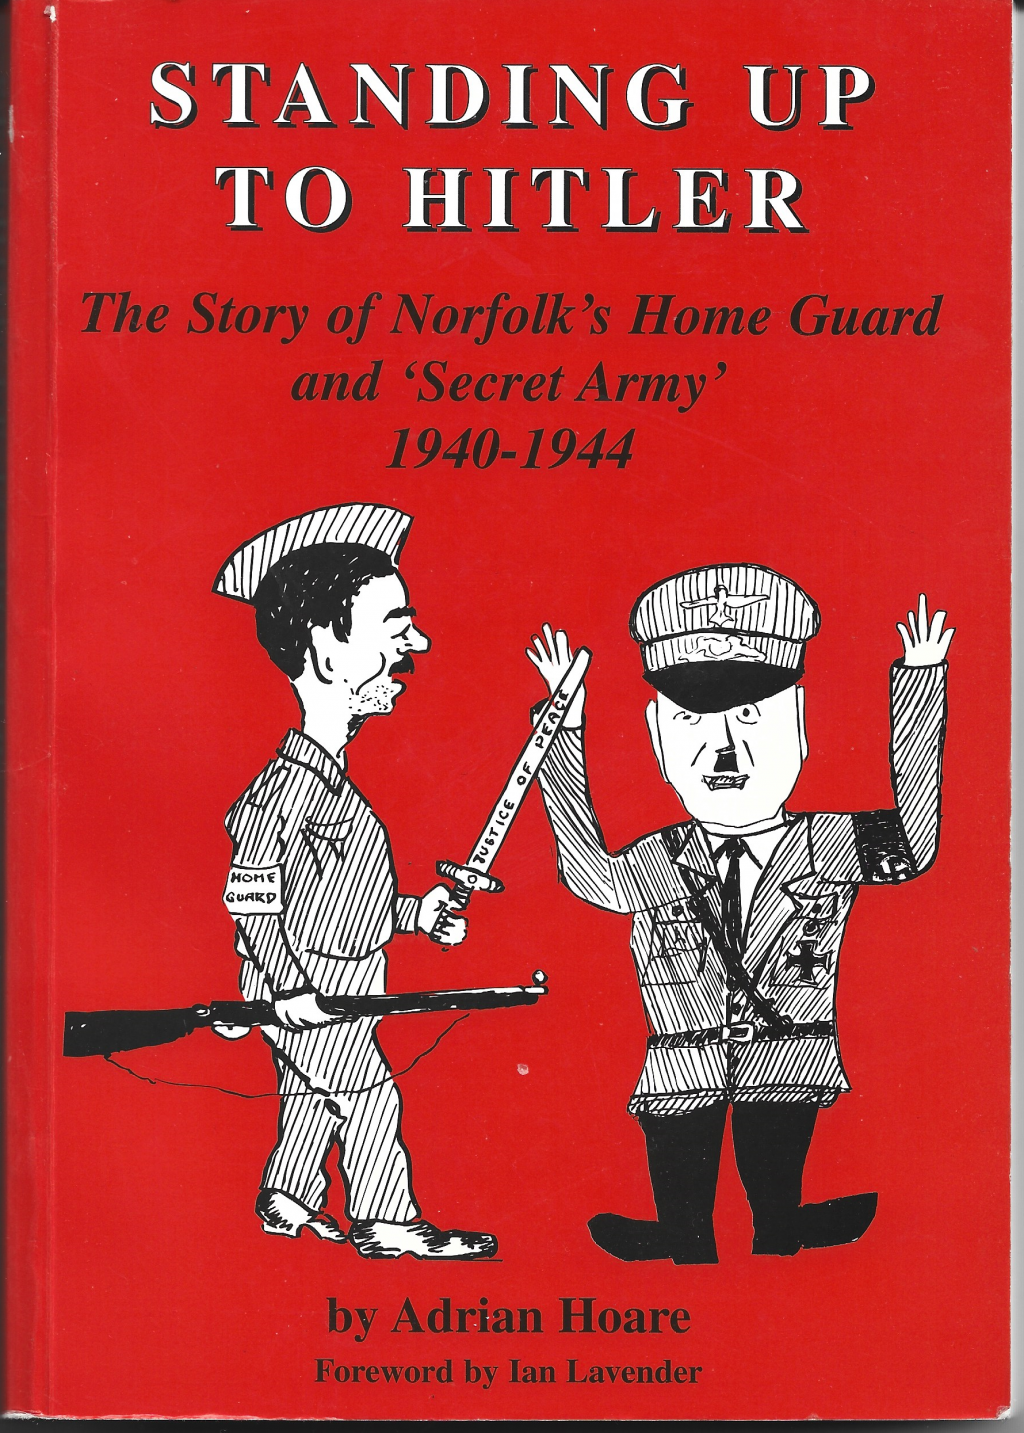 Red book cover standing up to Hitler with cartoon